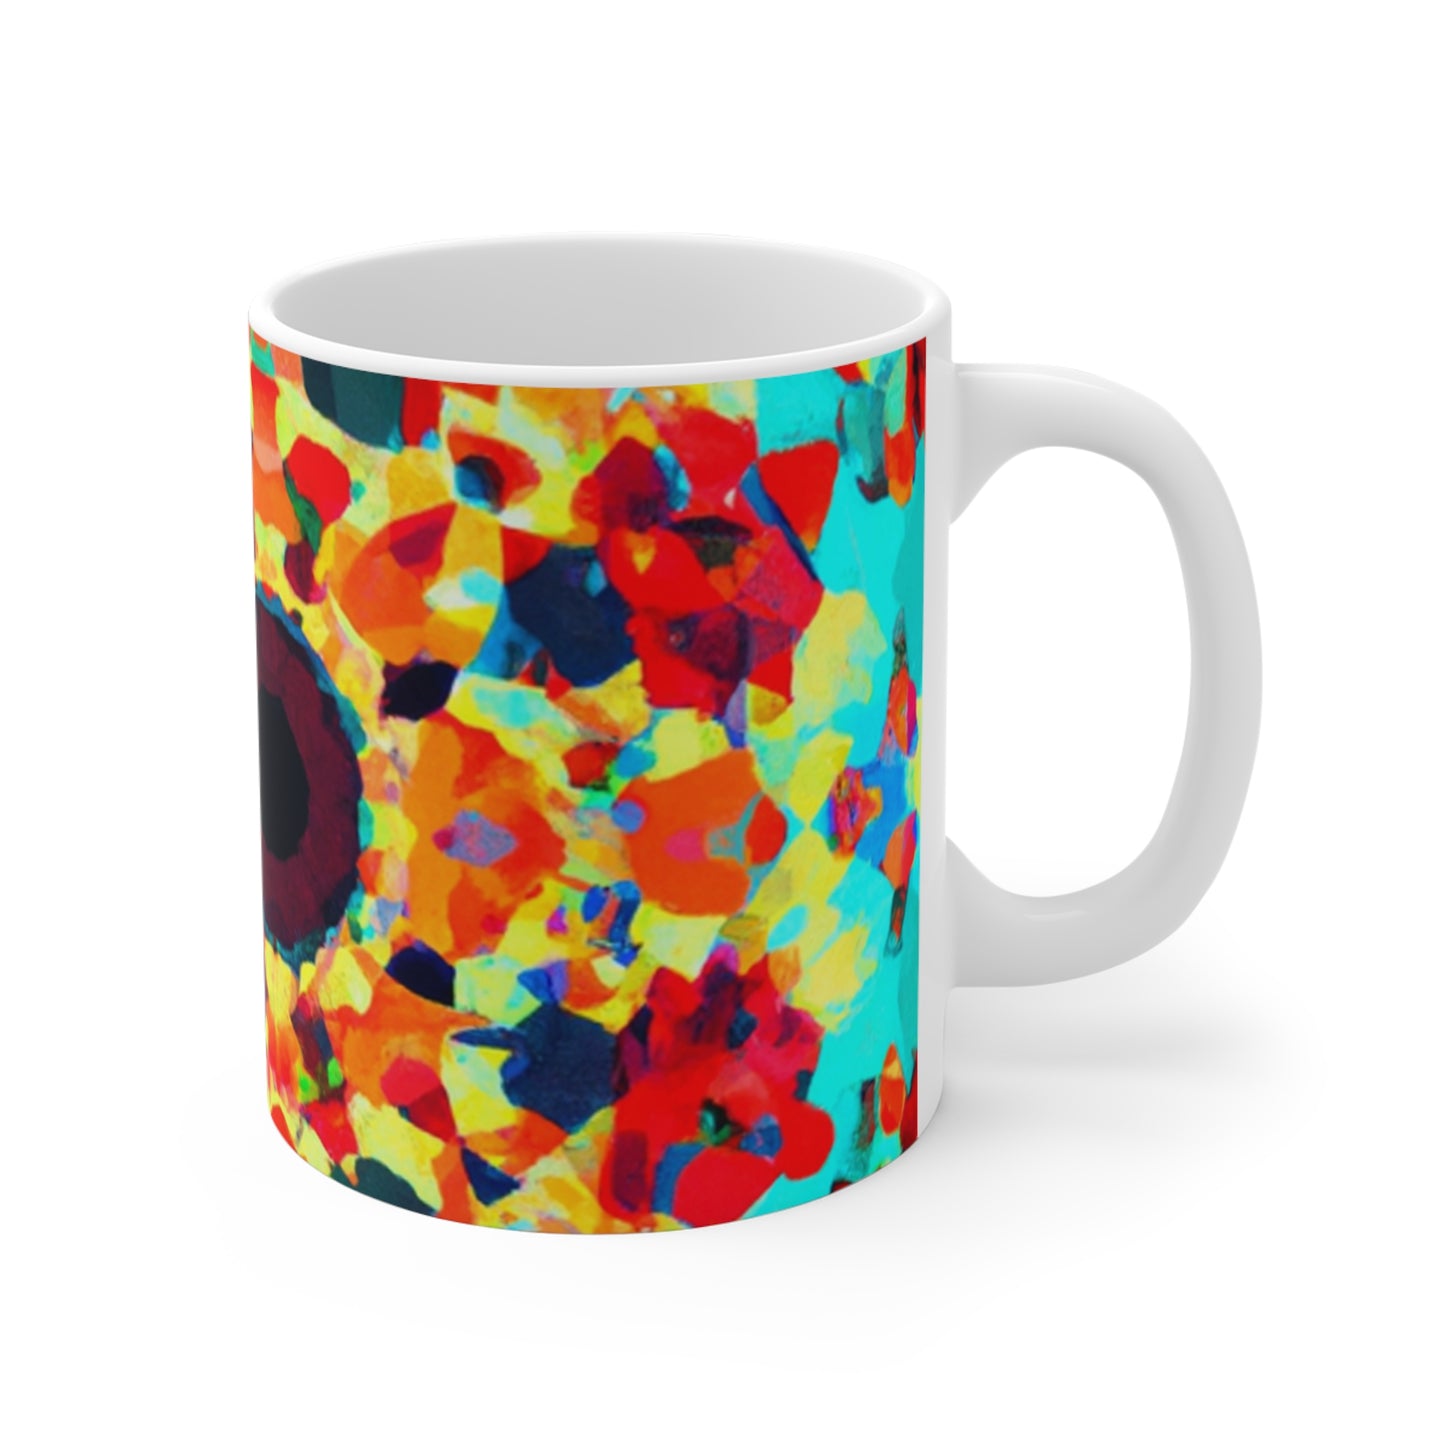 Sylvia's Select Specialty Coffee - Psychedelic Coffee Cup Mug 11 Ounce